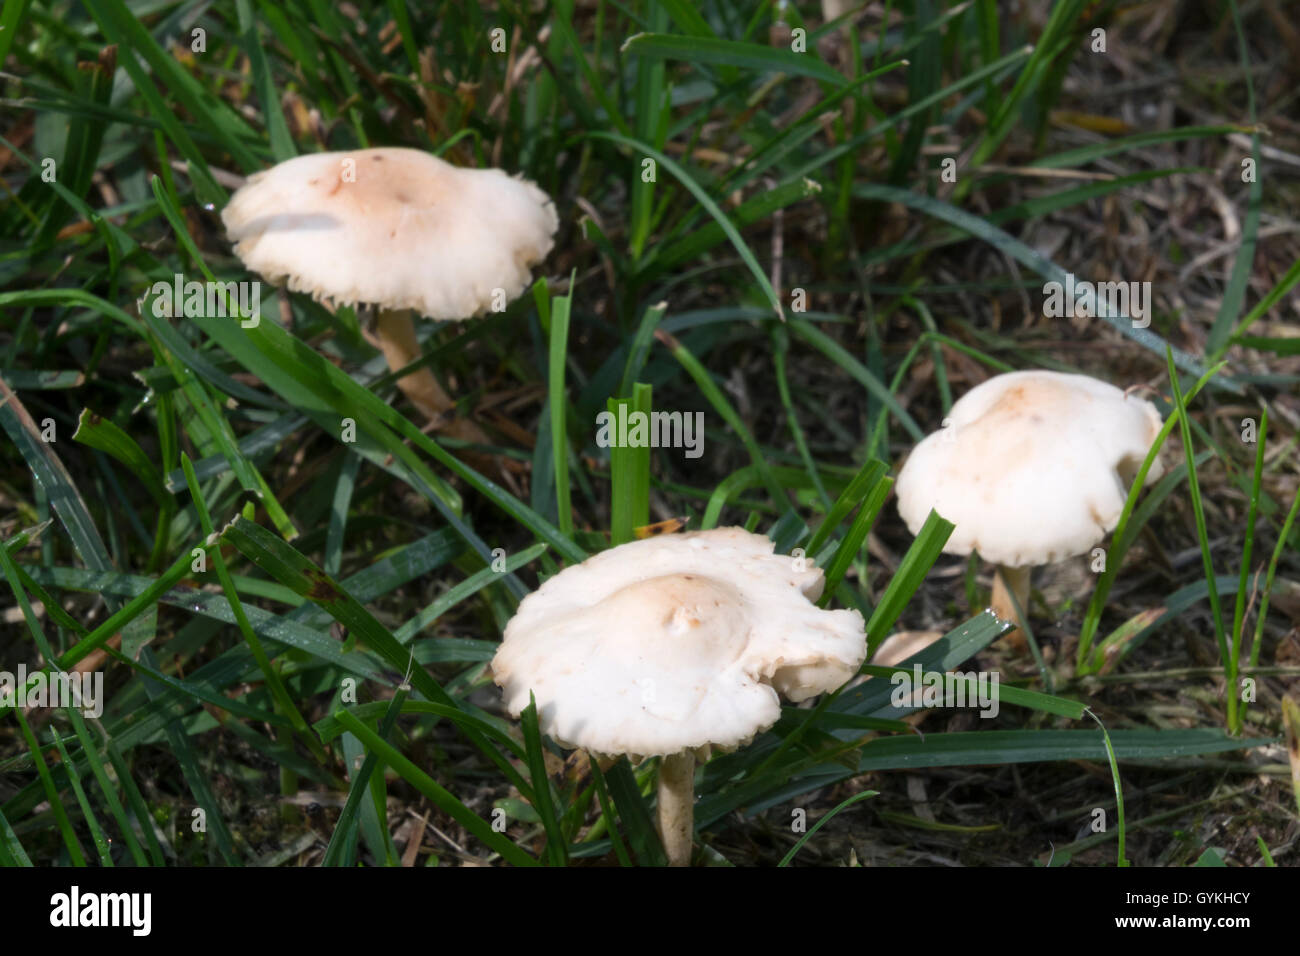 fairy ring mushrooms growing on a manicured lawn. Stock Photo